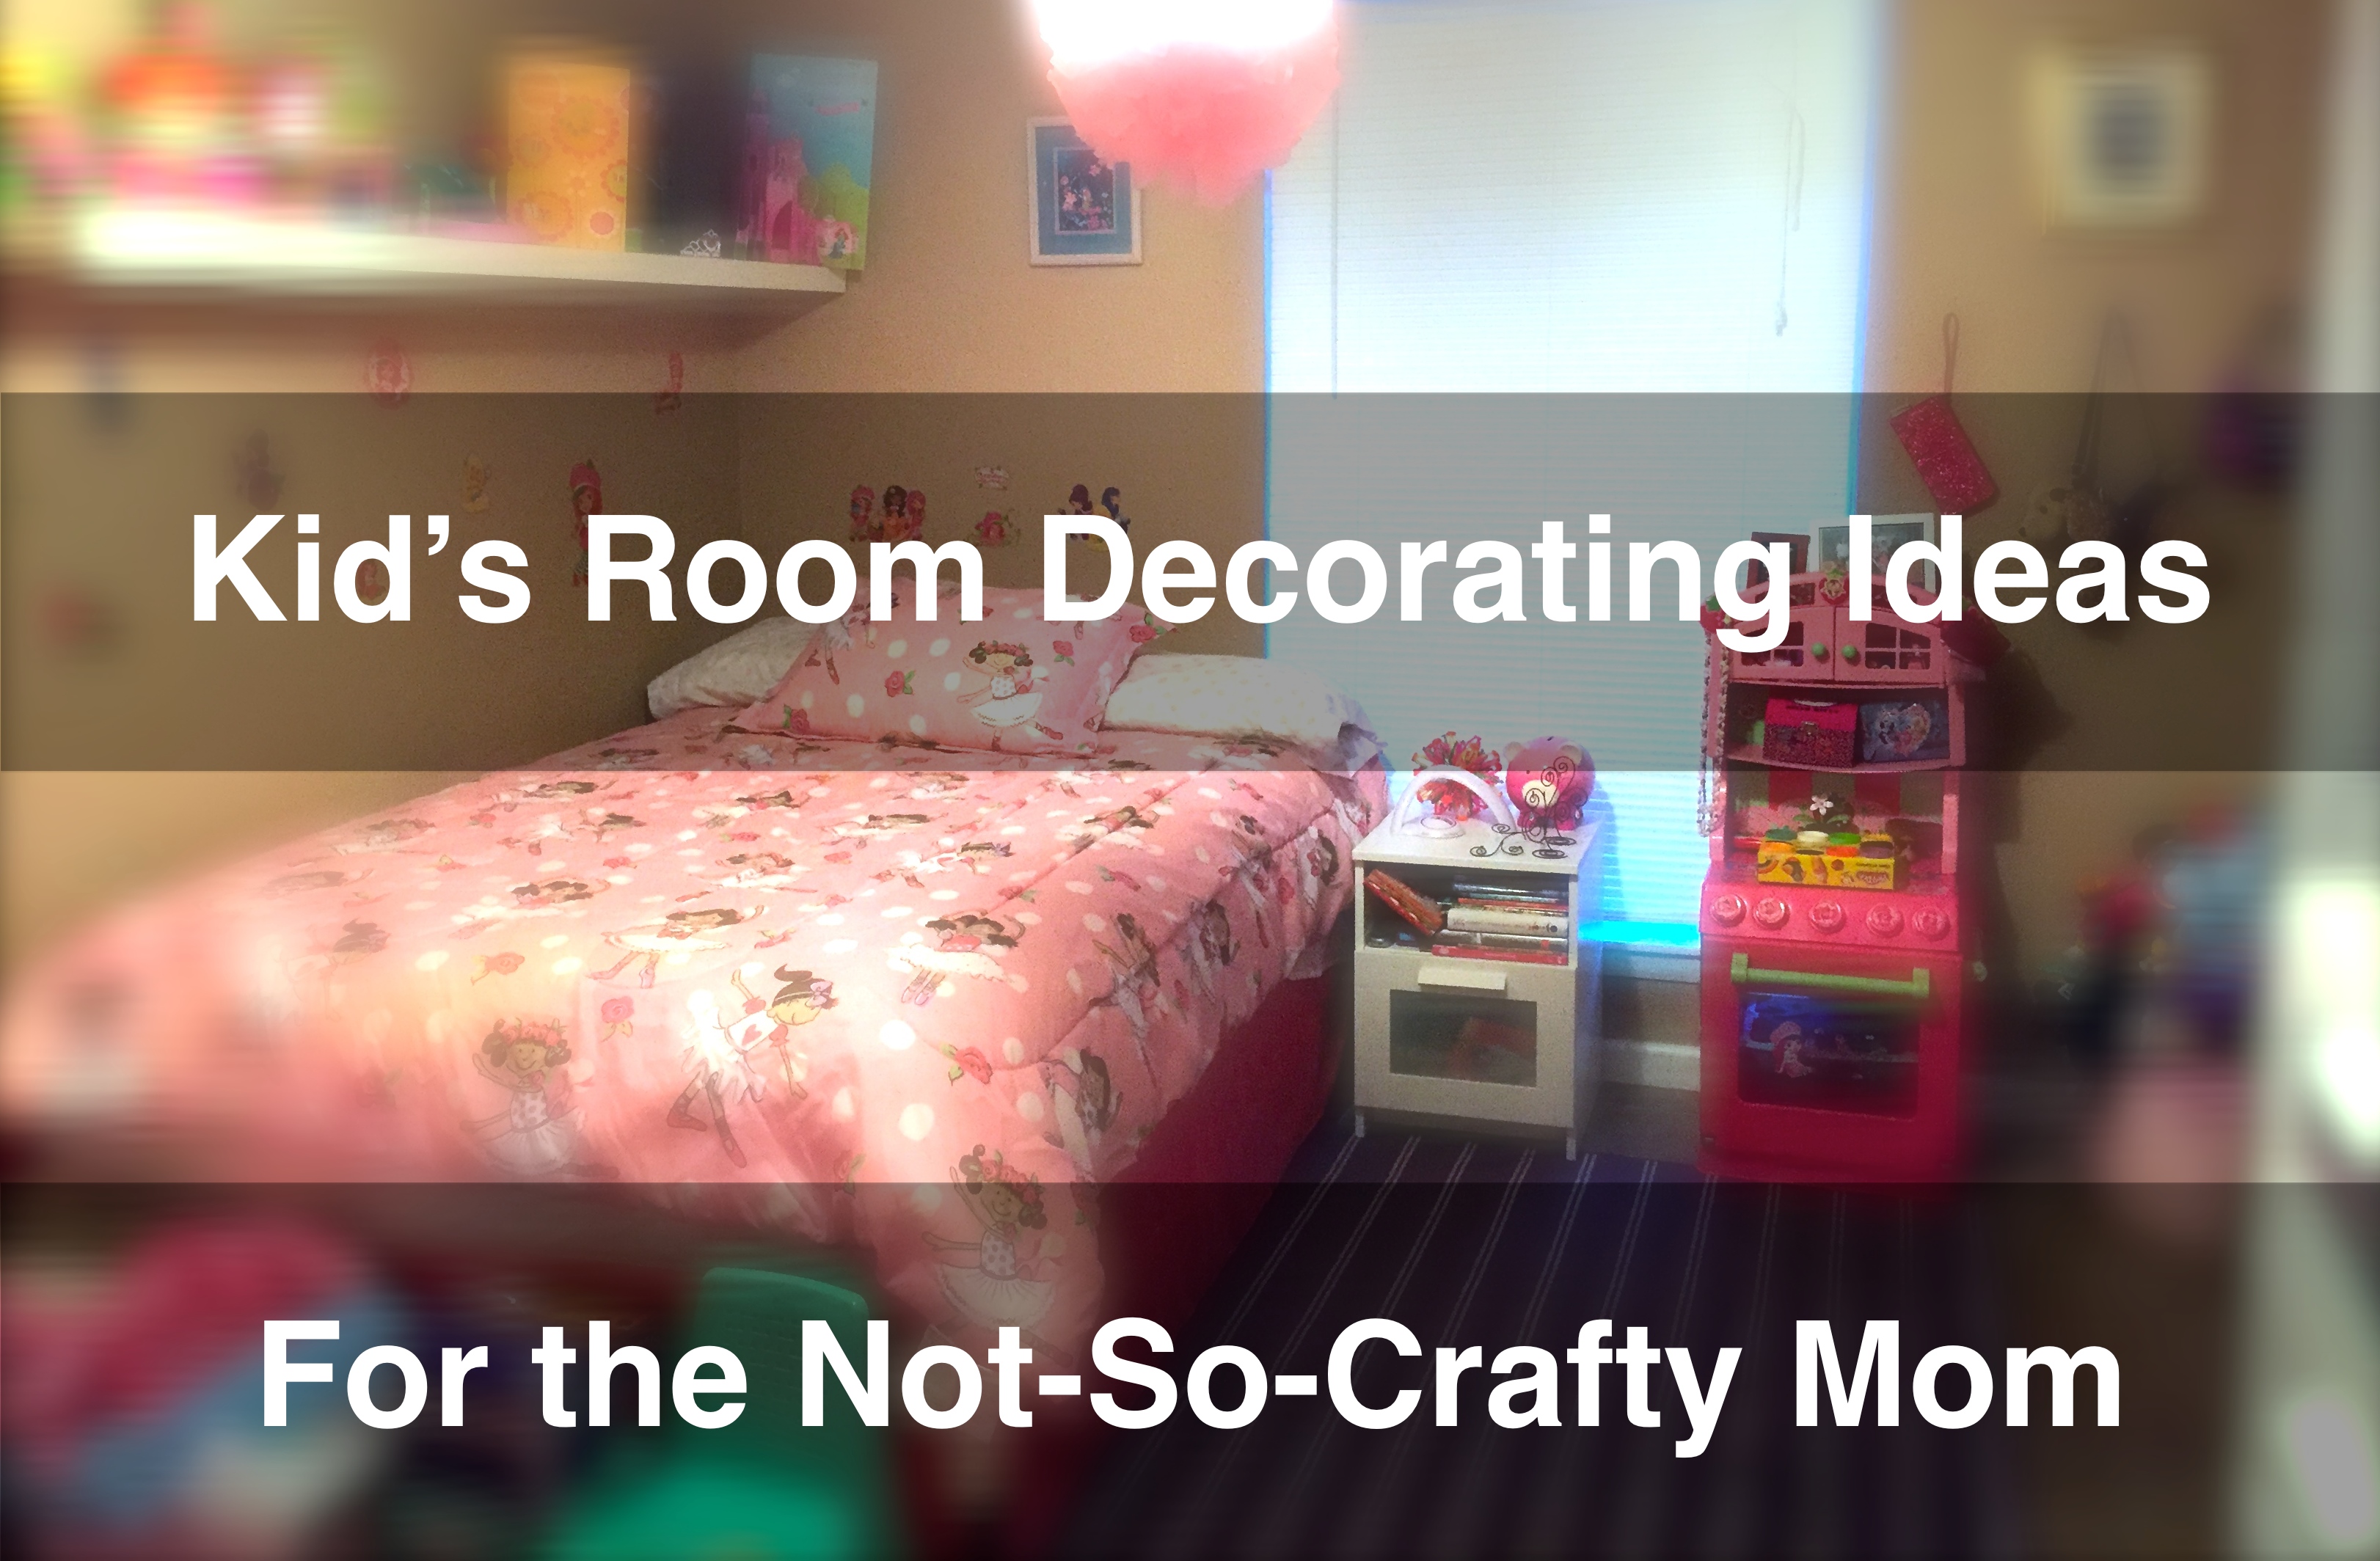 kid's room decorating ideas for the not-so-crafty mom